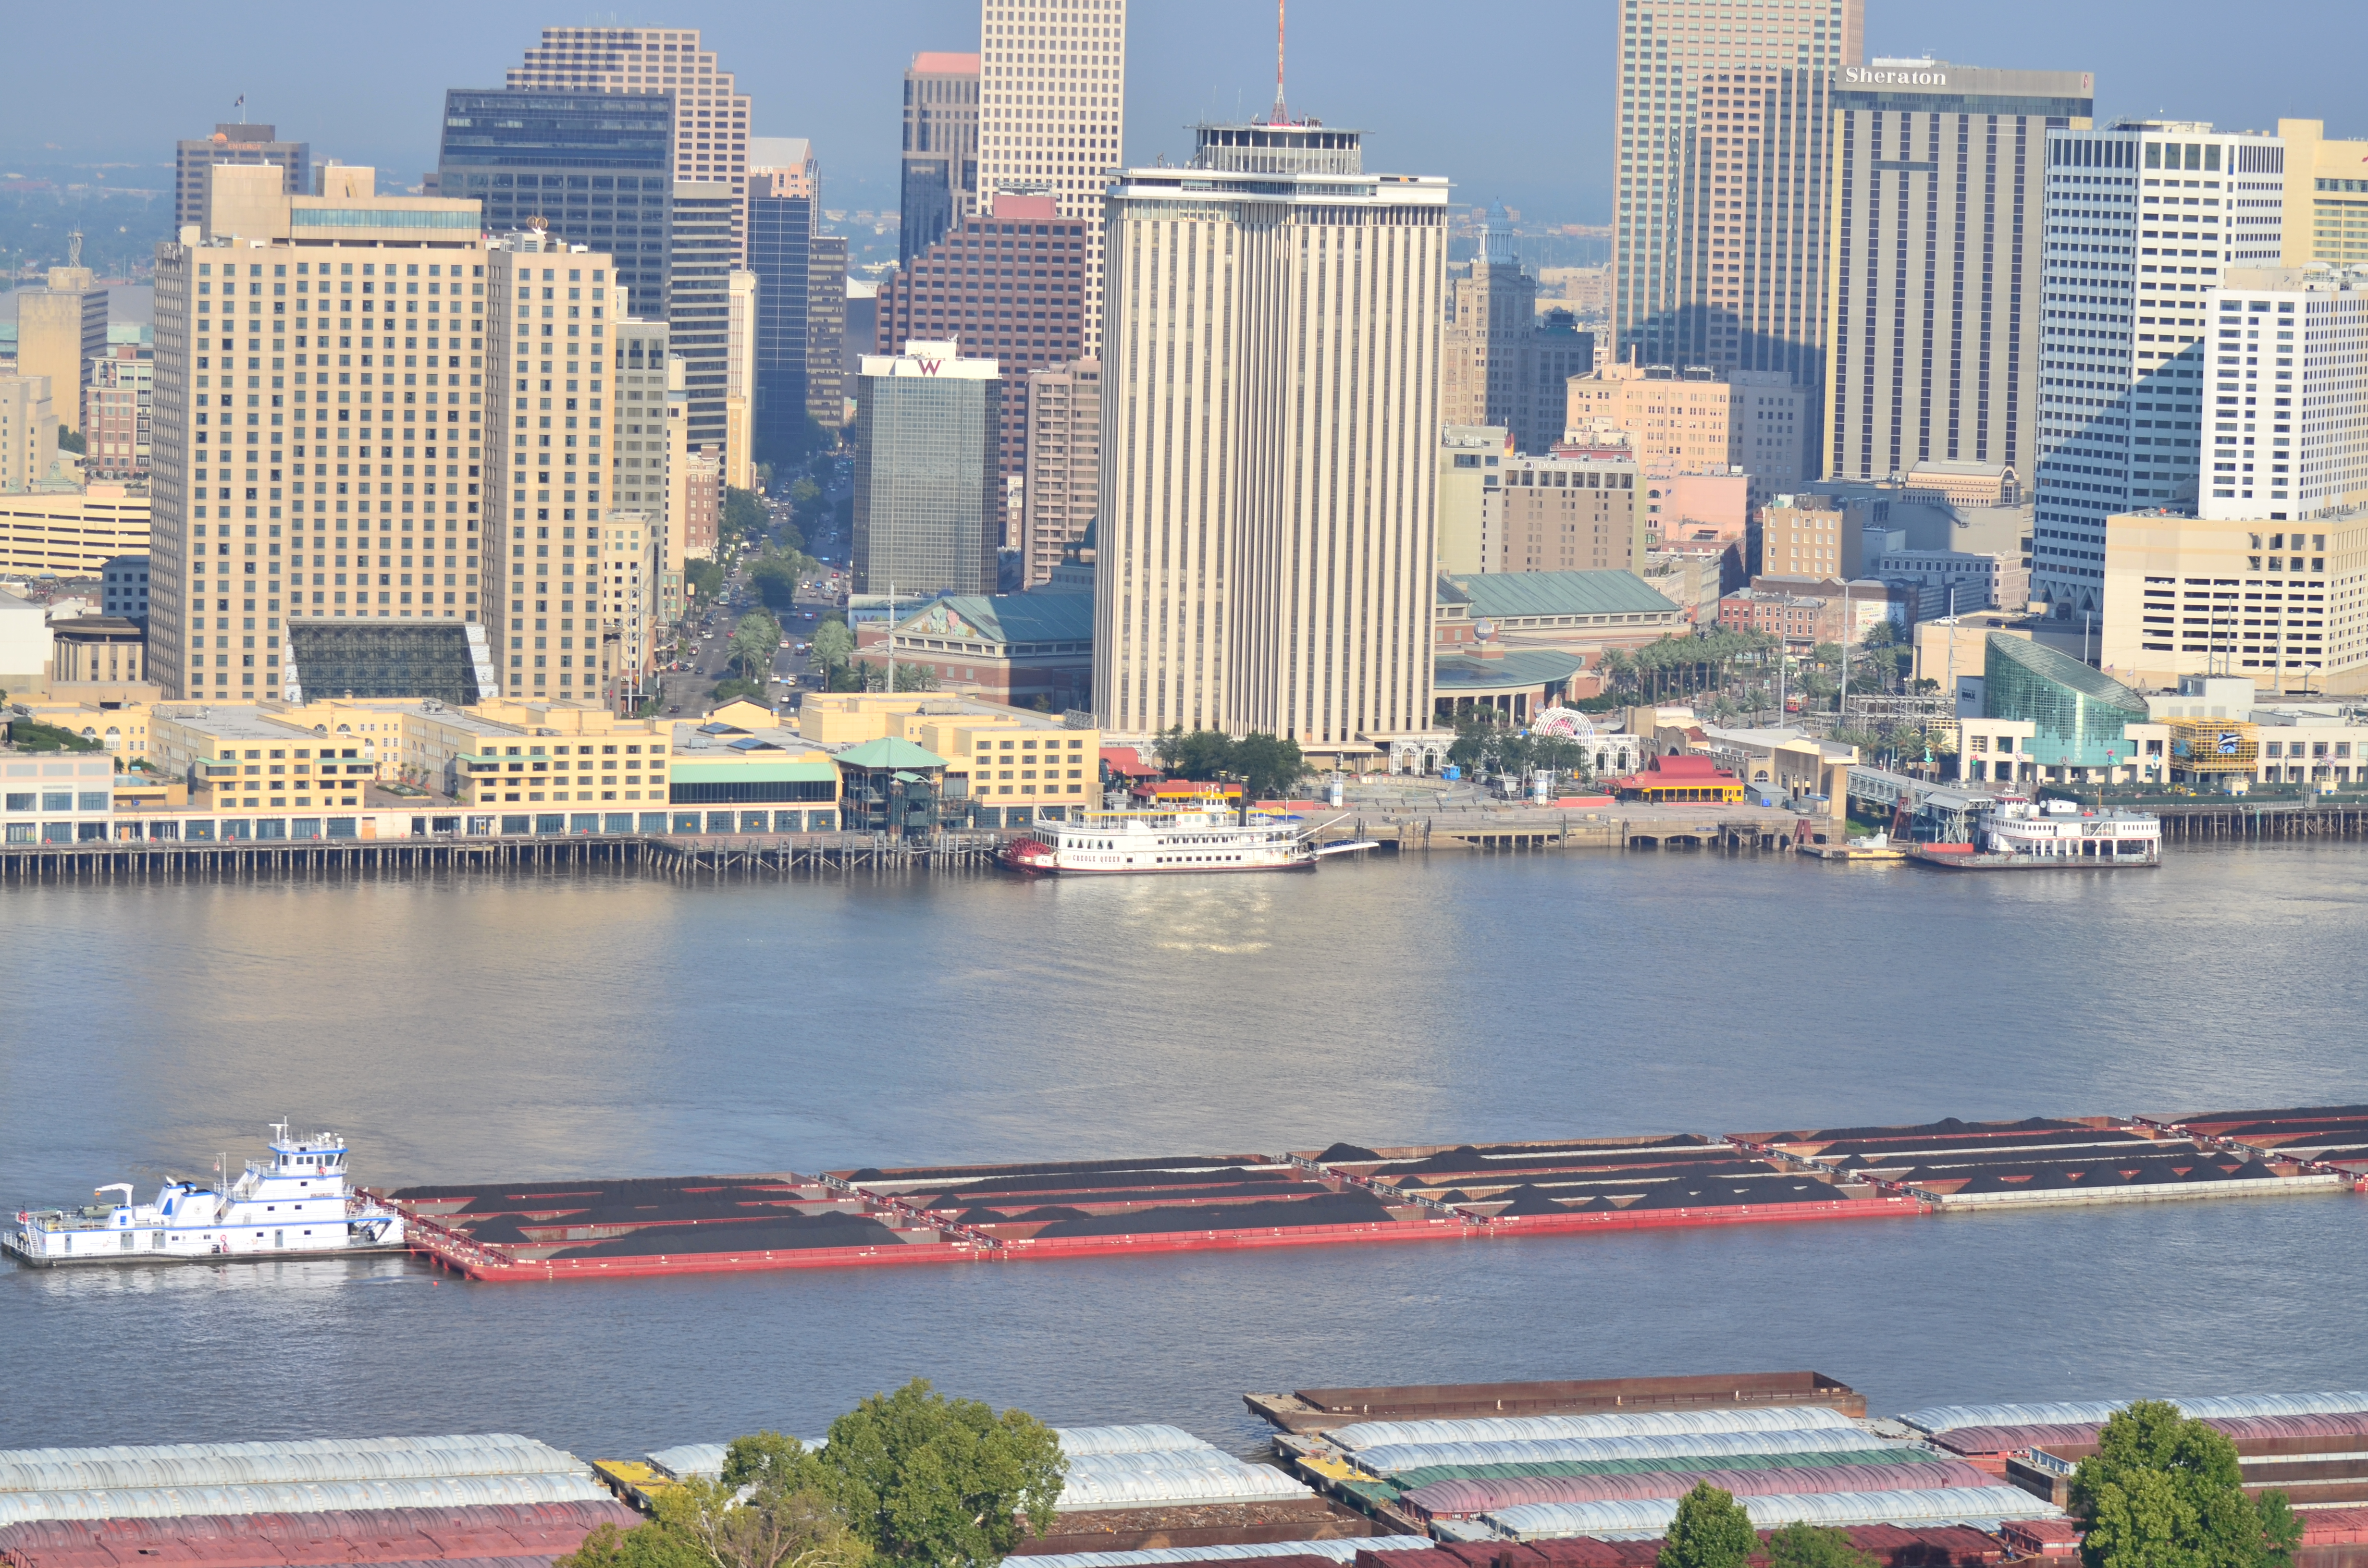 Towboat transporting dry cargo with city in the background